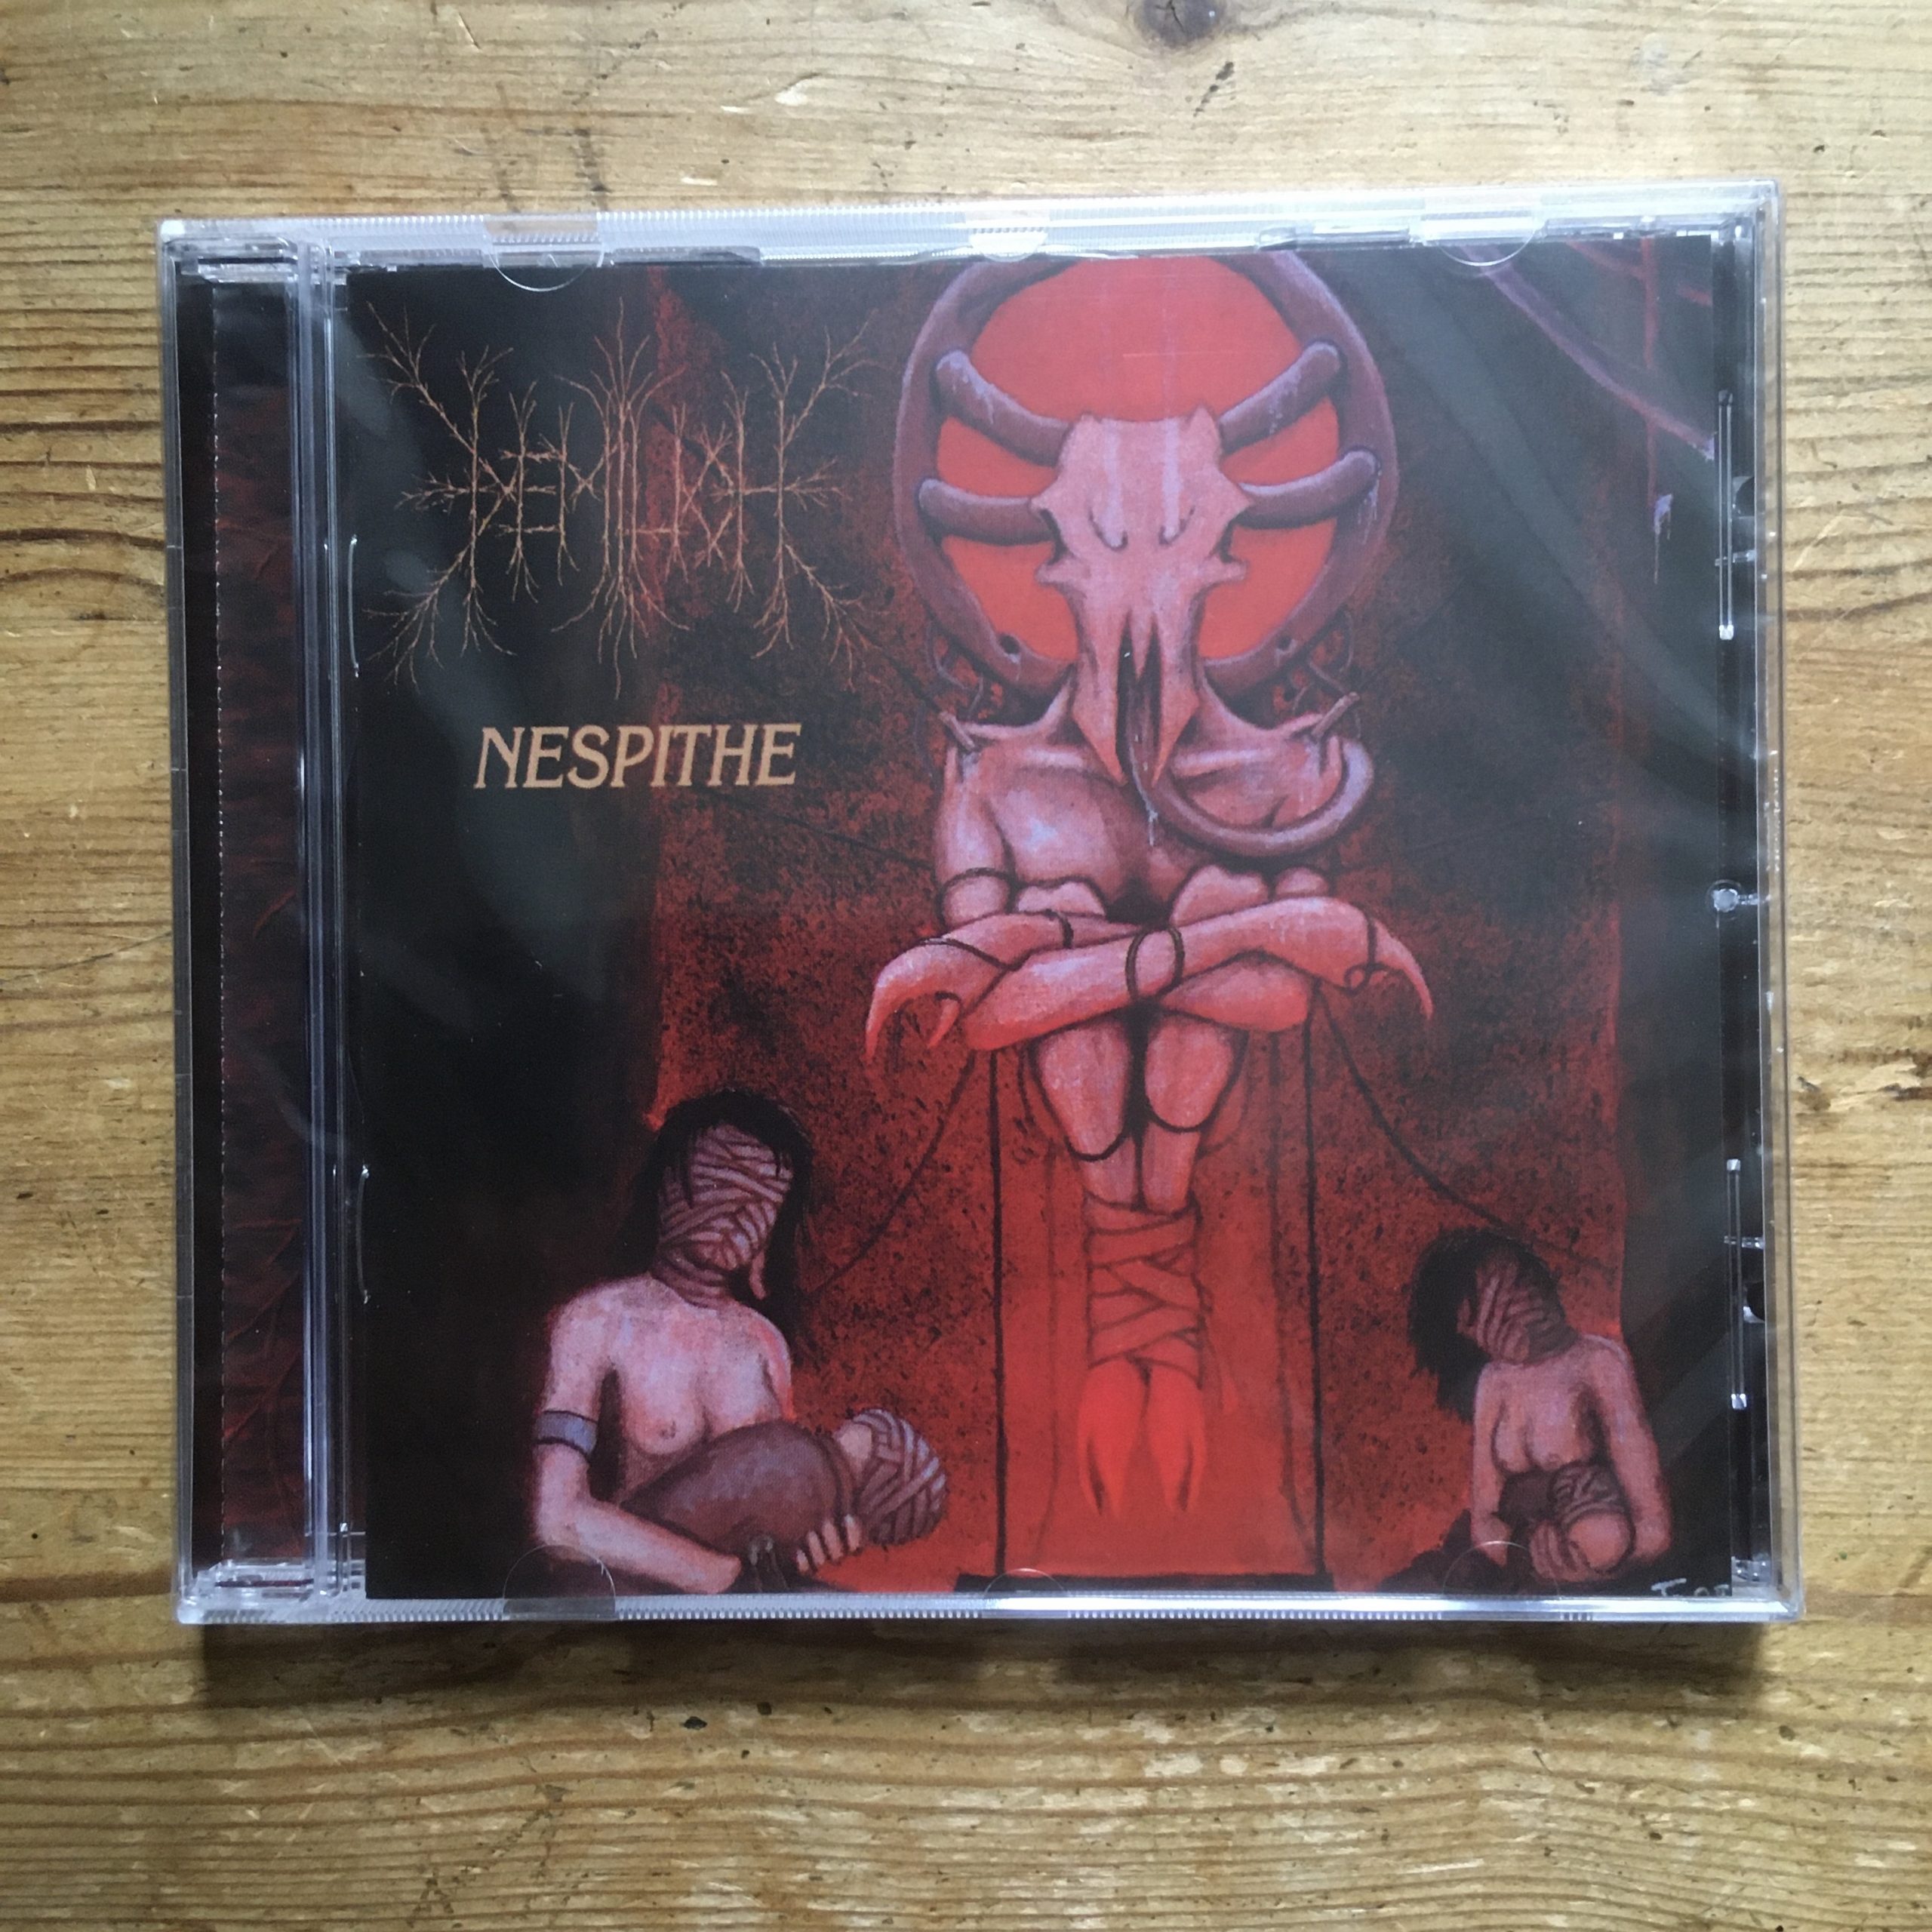 Photo of the Demilich - "Nespithe" CD